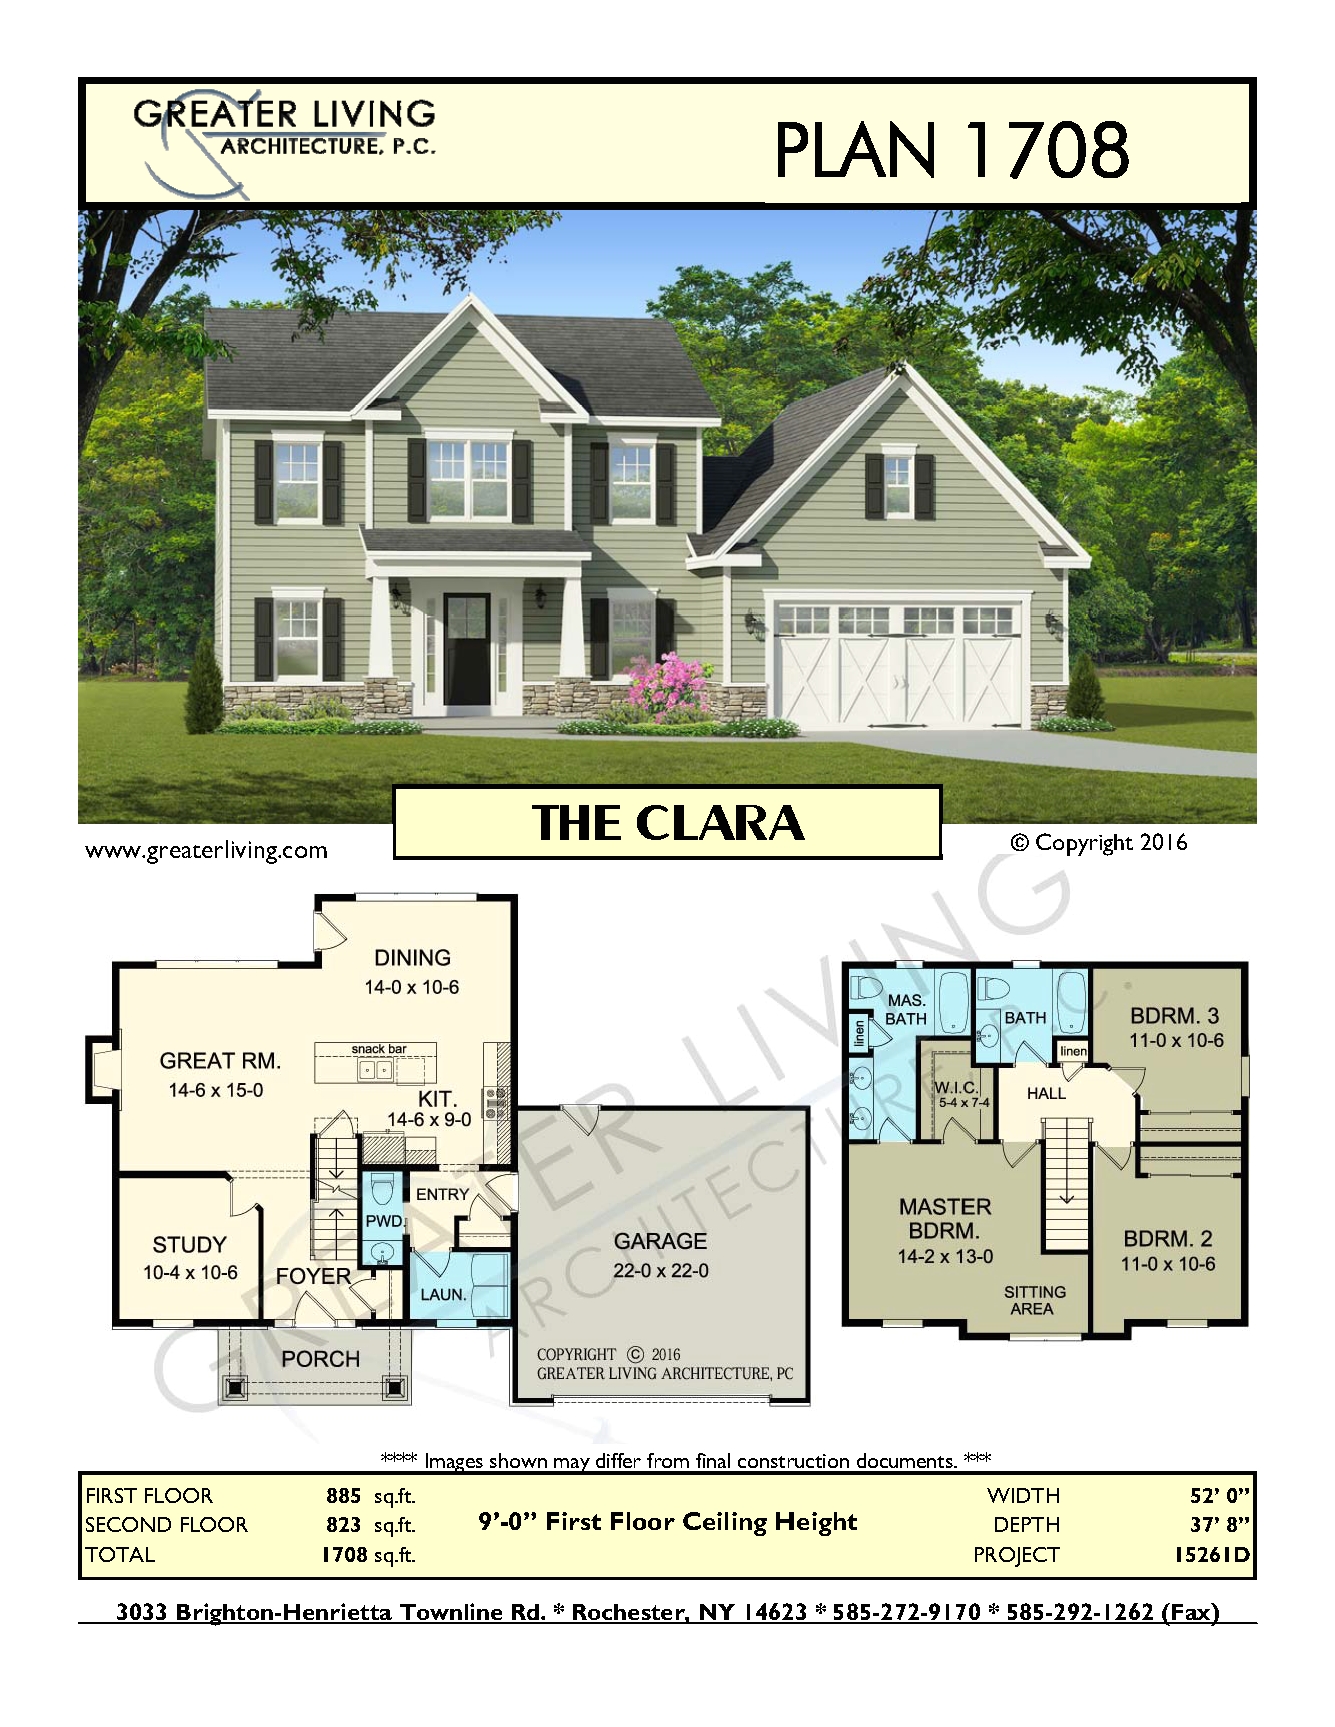 plan 1708 the clara two story house plan greater living architecture residential architecture